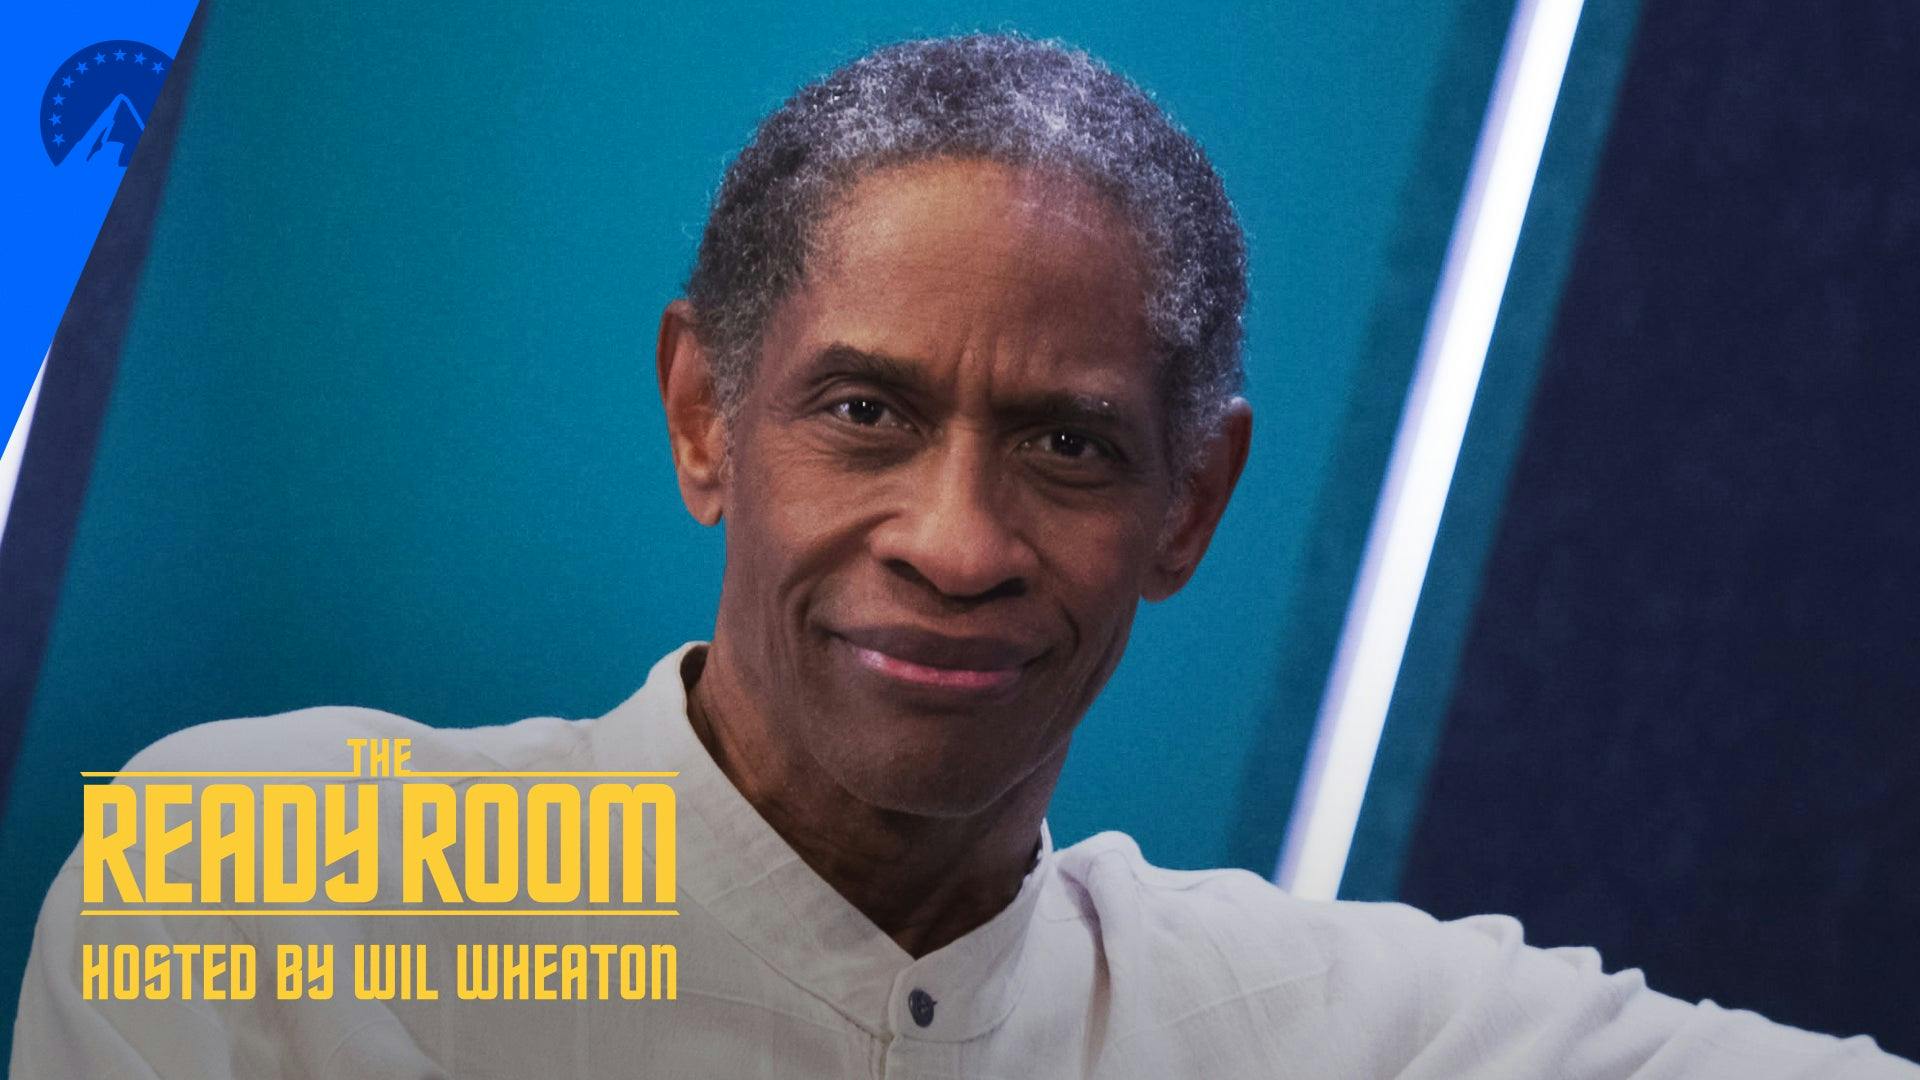 Close-up of Tim Russ on The Ready Room set